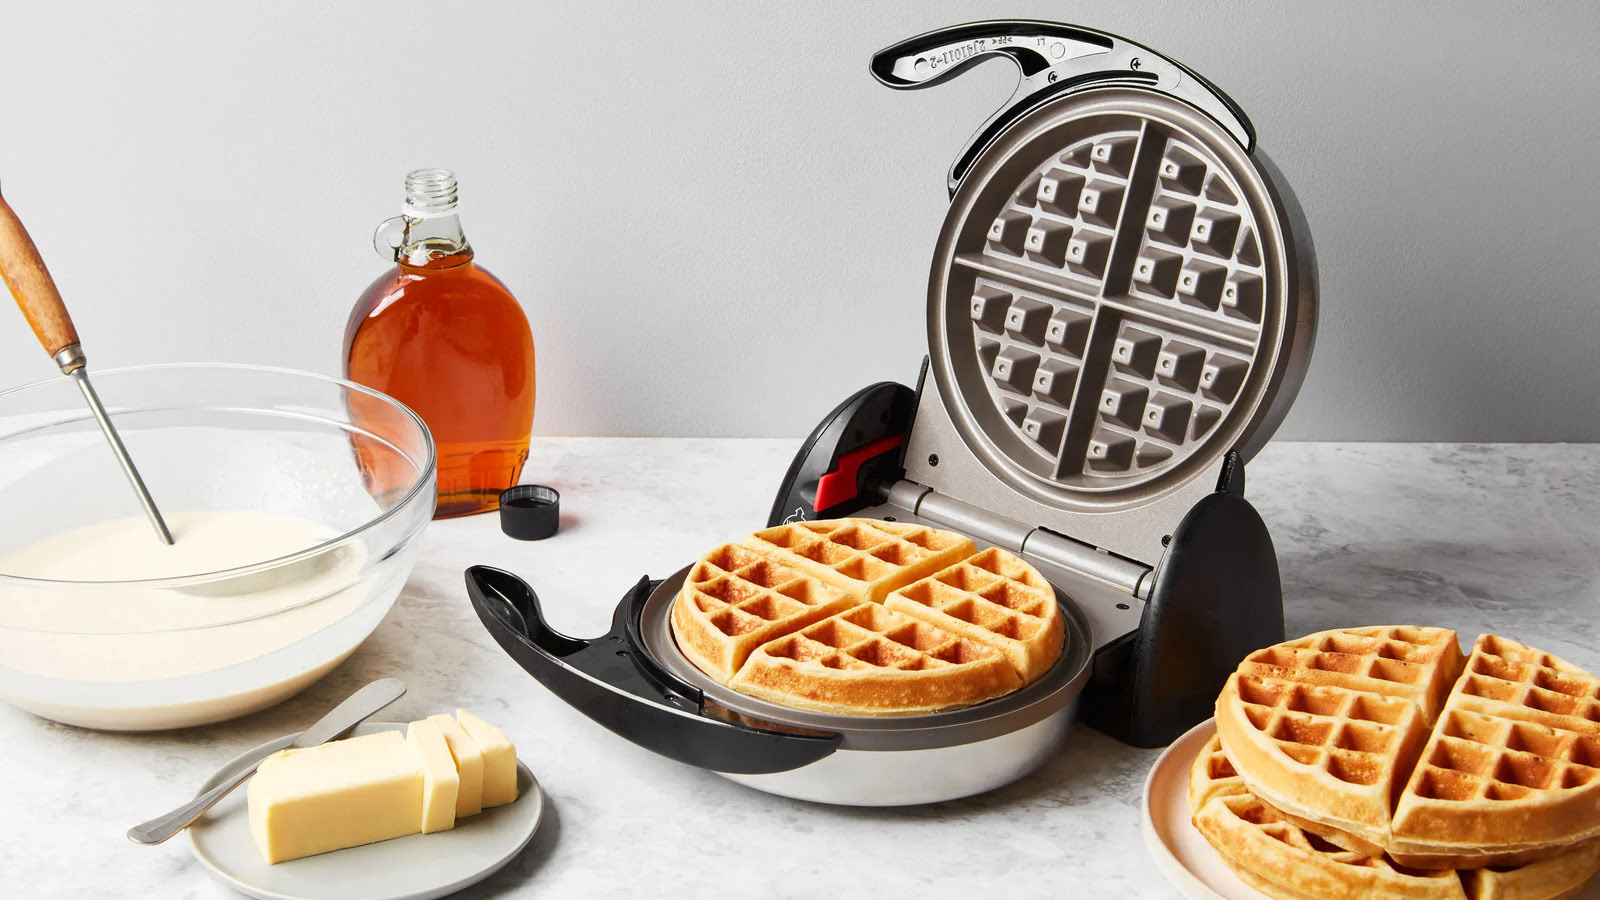 What Waffle Iron Does Alton Brown Use